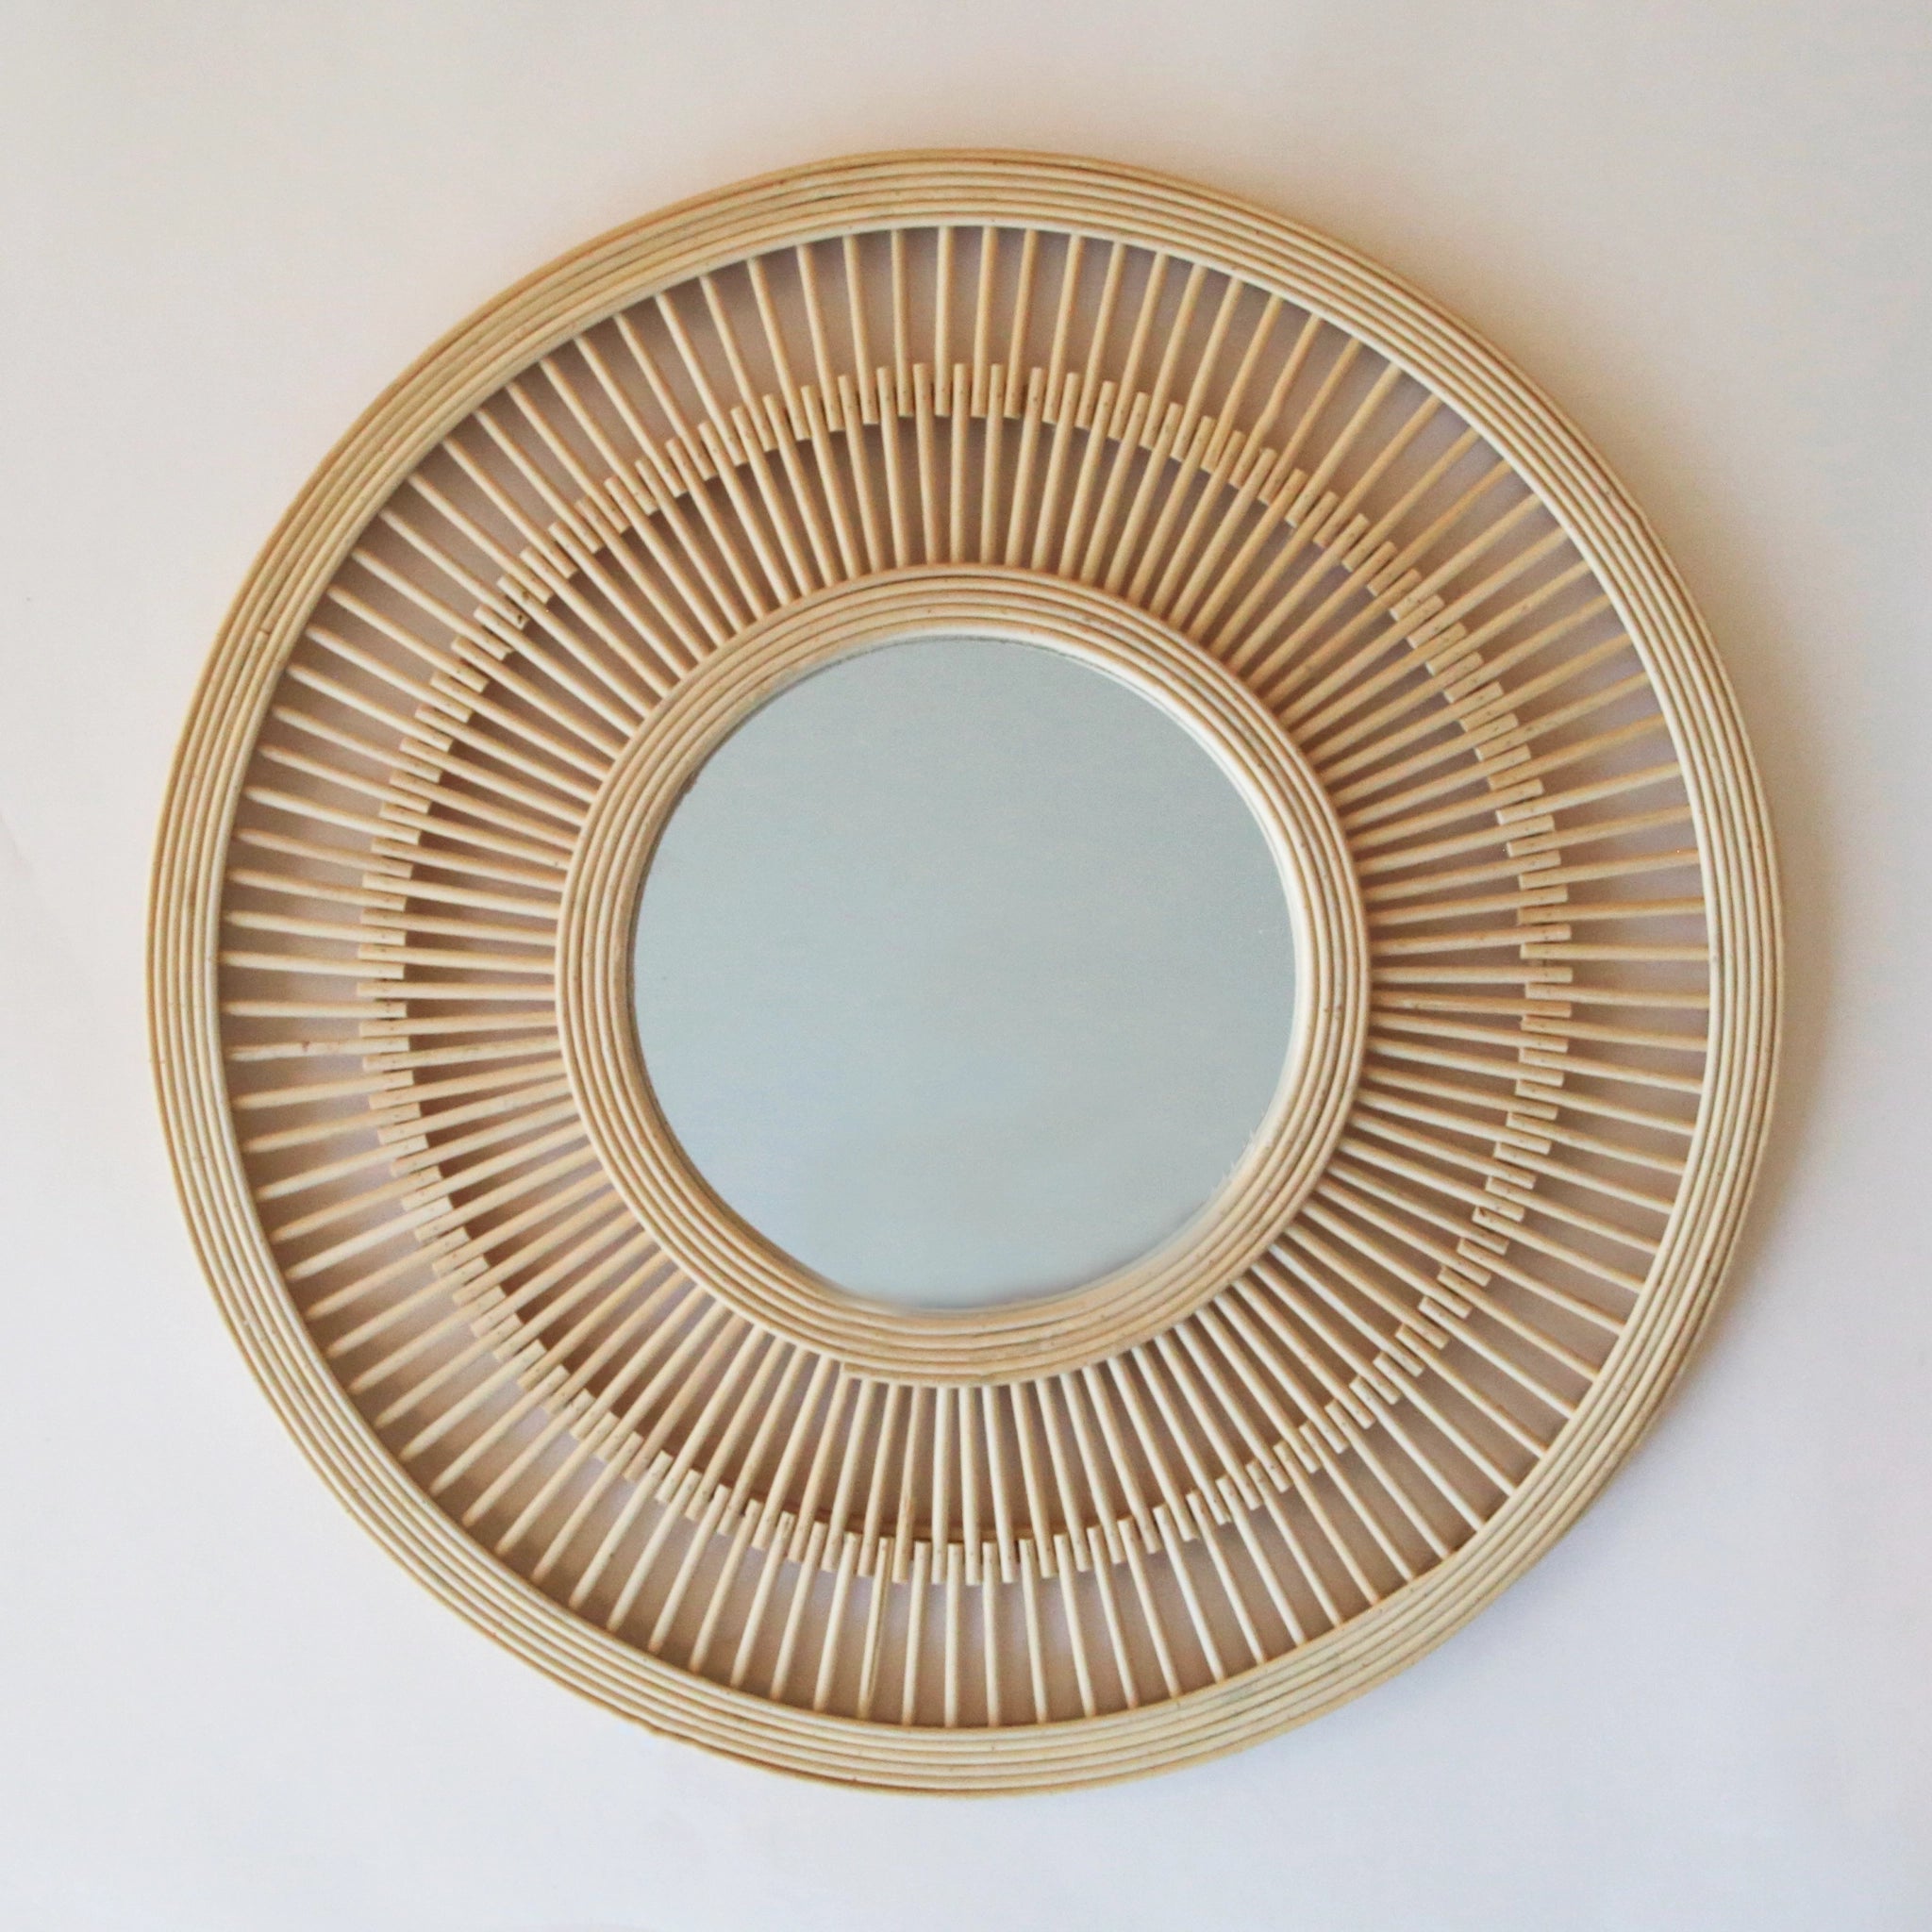 A circle mirror with a bamboo framing and a small round mirror in the center.